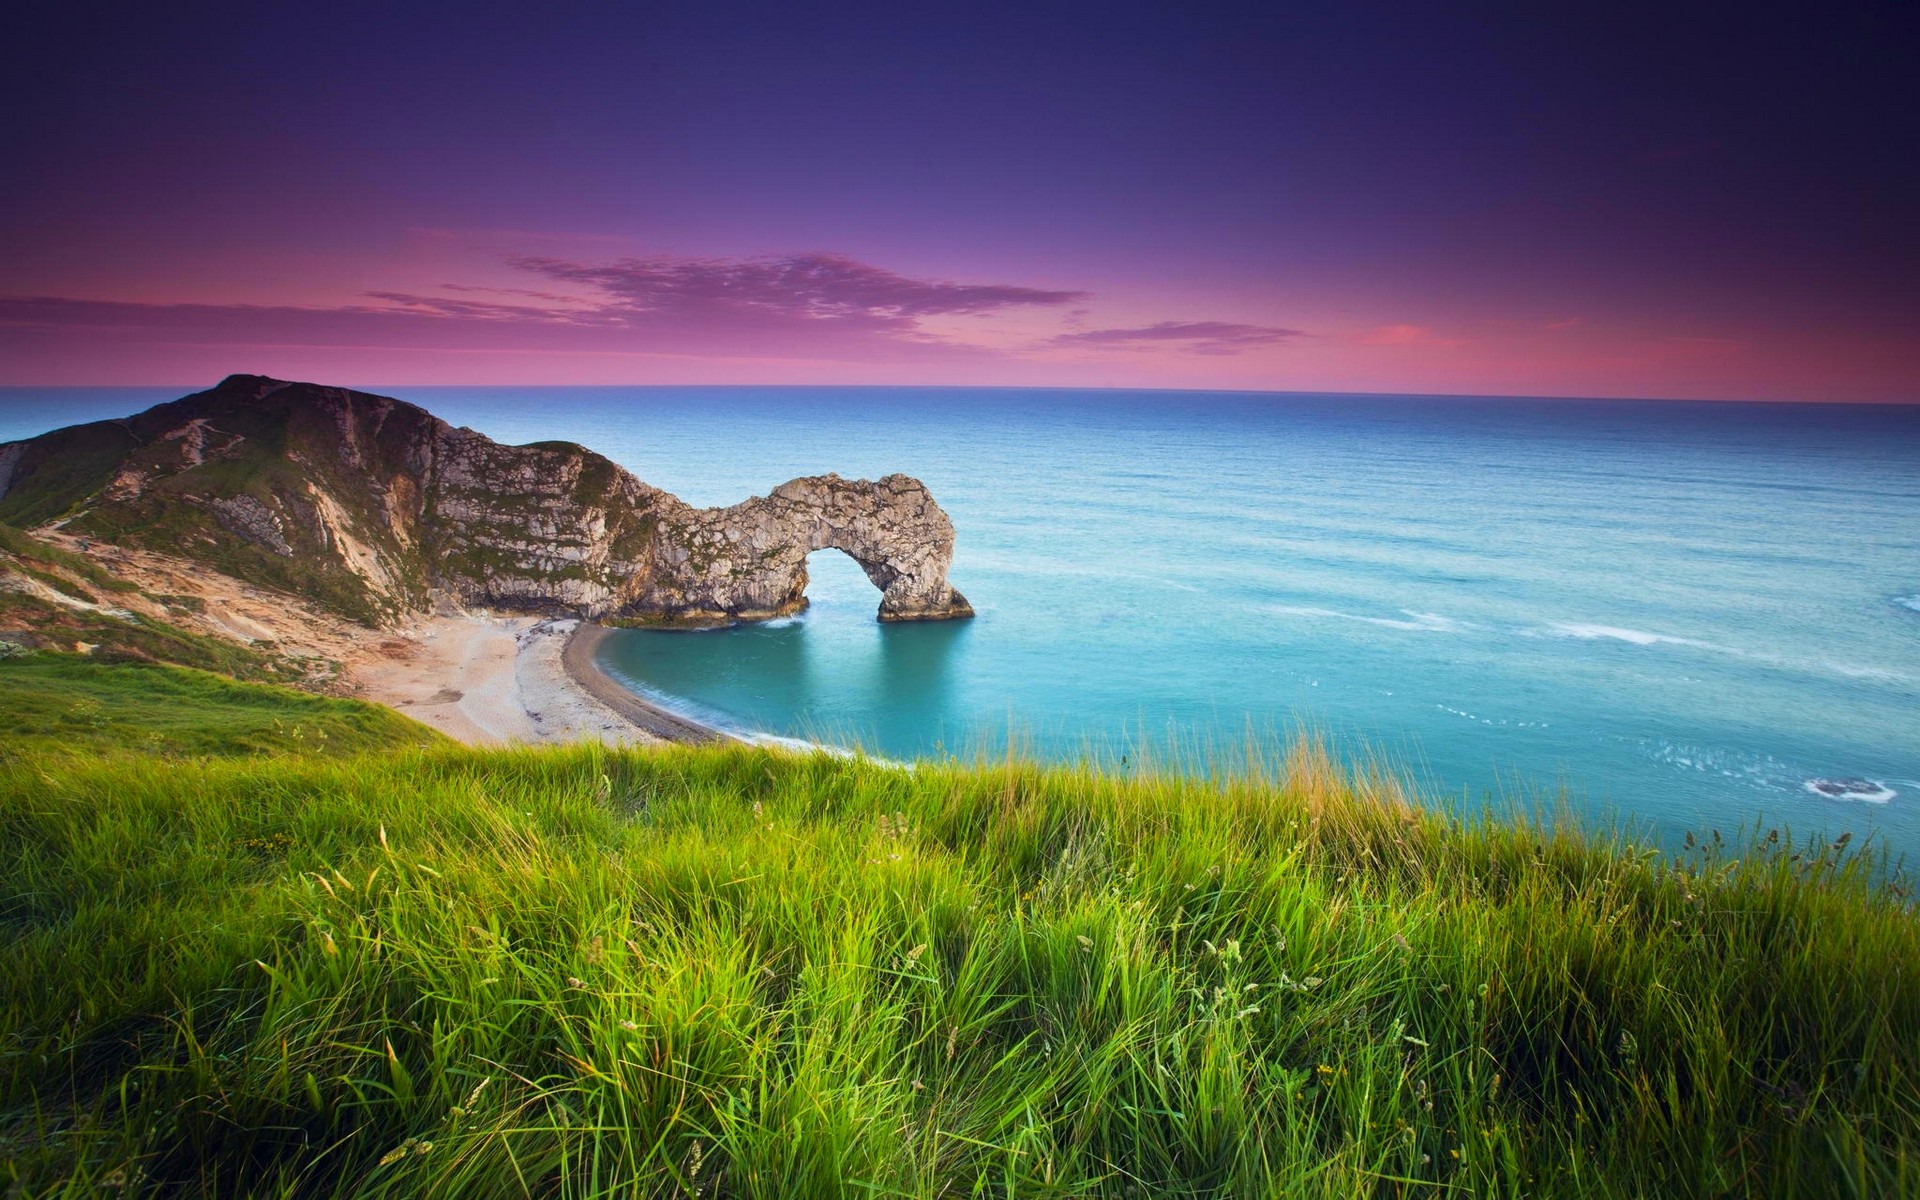 General 1920x1200 nature landscape Durdle Door England beach sea grass arch sand clouds sunset hills UK sky colorful outdoors Jurassic Coast